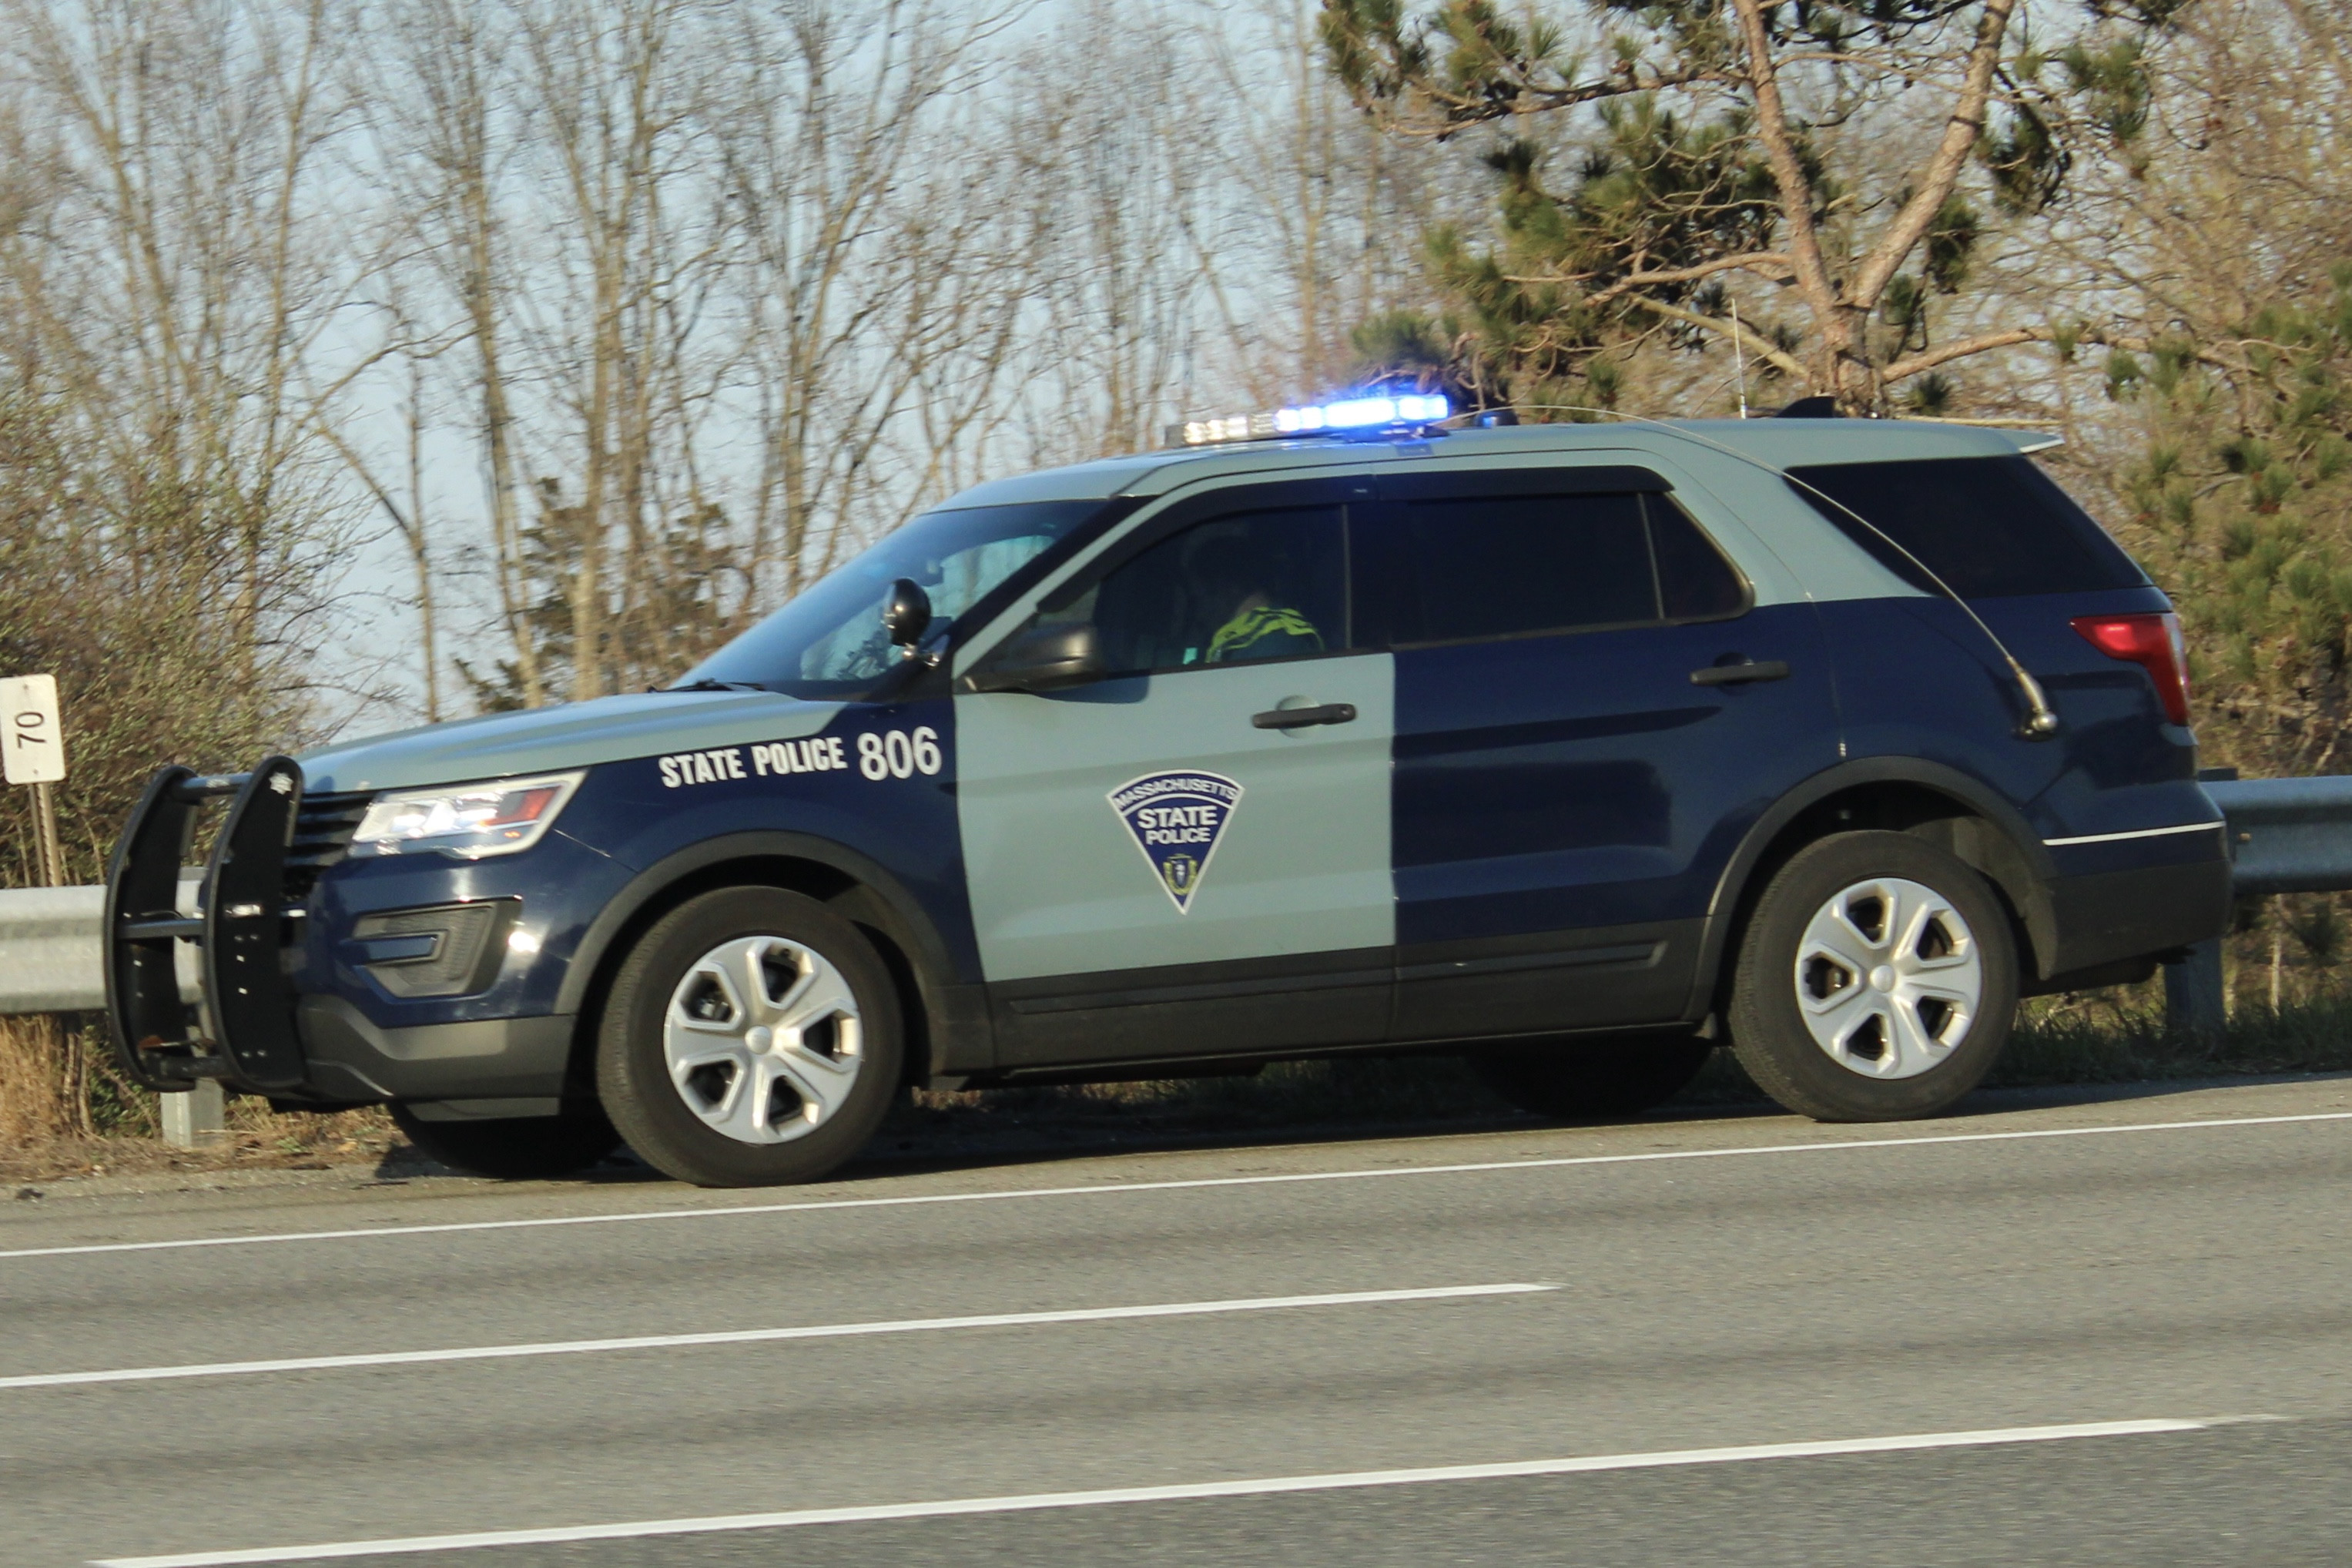 A photo  of Massachusetts State Police
            Cruiser 806, a 2017 Ford Police Interceptor Utility             taken by @riemergencyvehicles